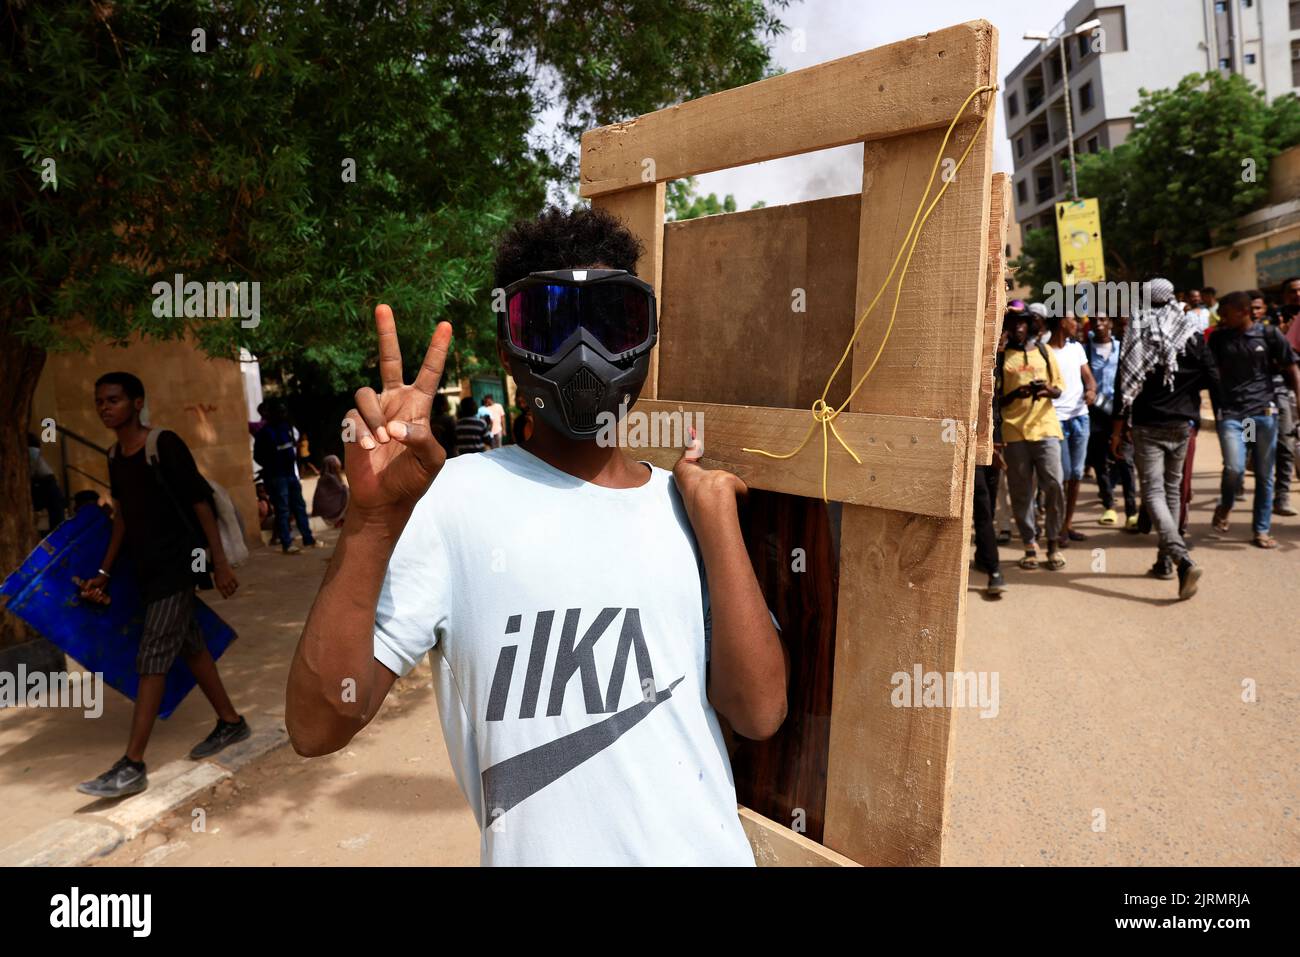 A protester gestures during at a rally against military rule following the last coup, in Khartoum, Sudan August 25, 2022. REUTERS/Mohamed Nureldin Abdallah Stock Photo